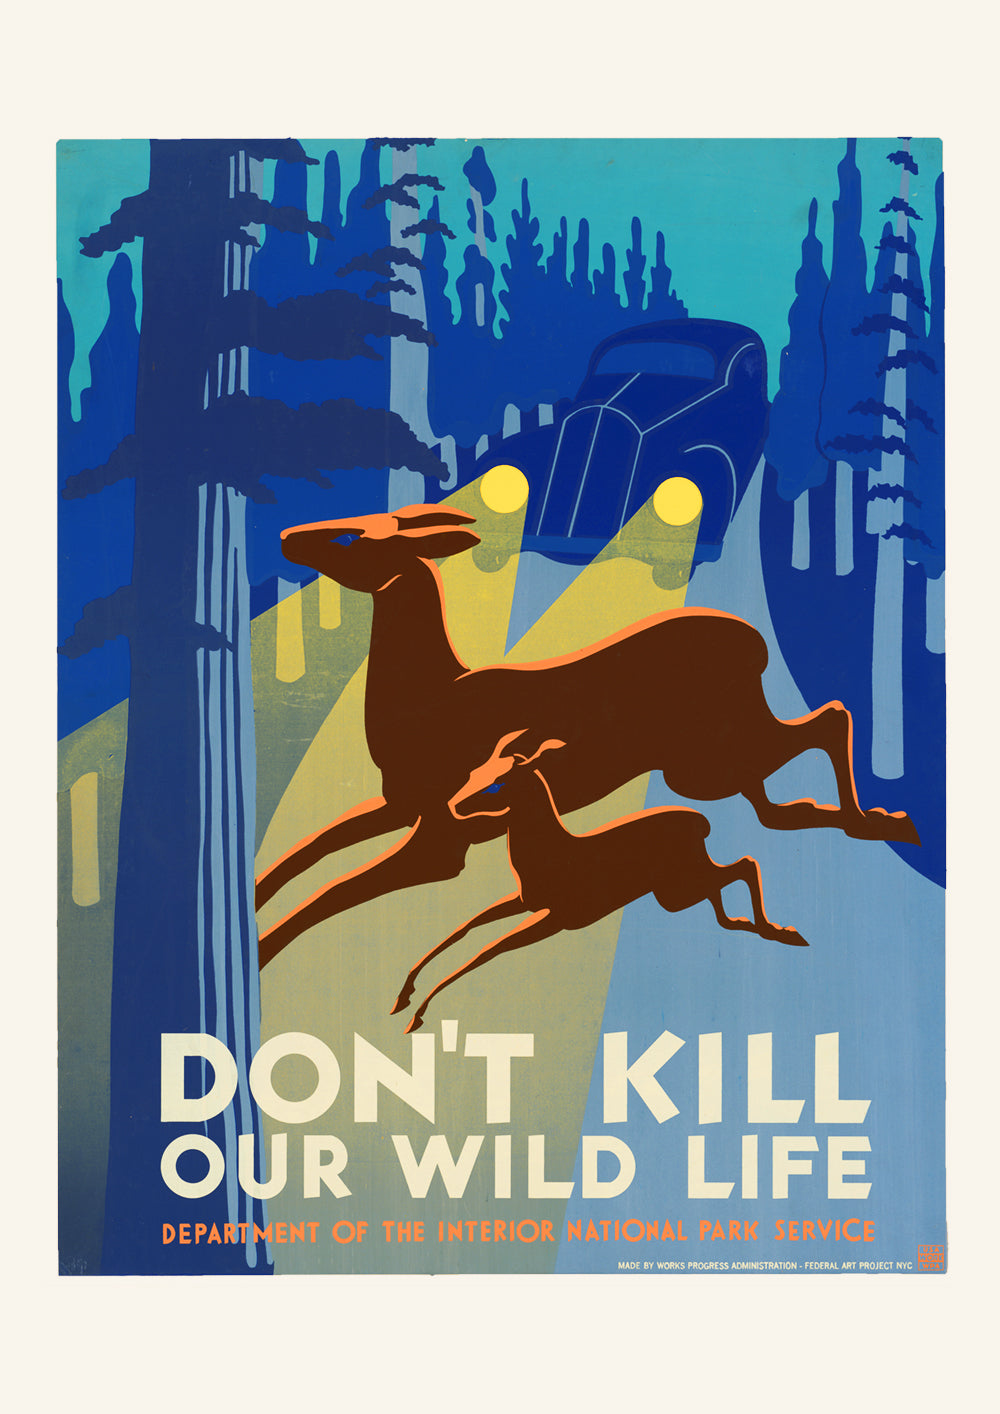 Don't kill our wildlife – American poster